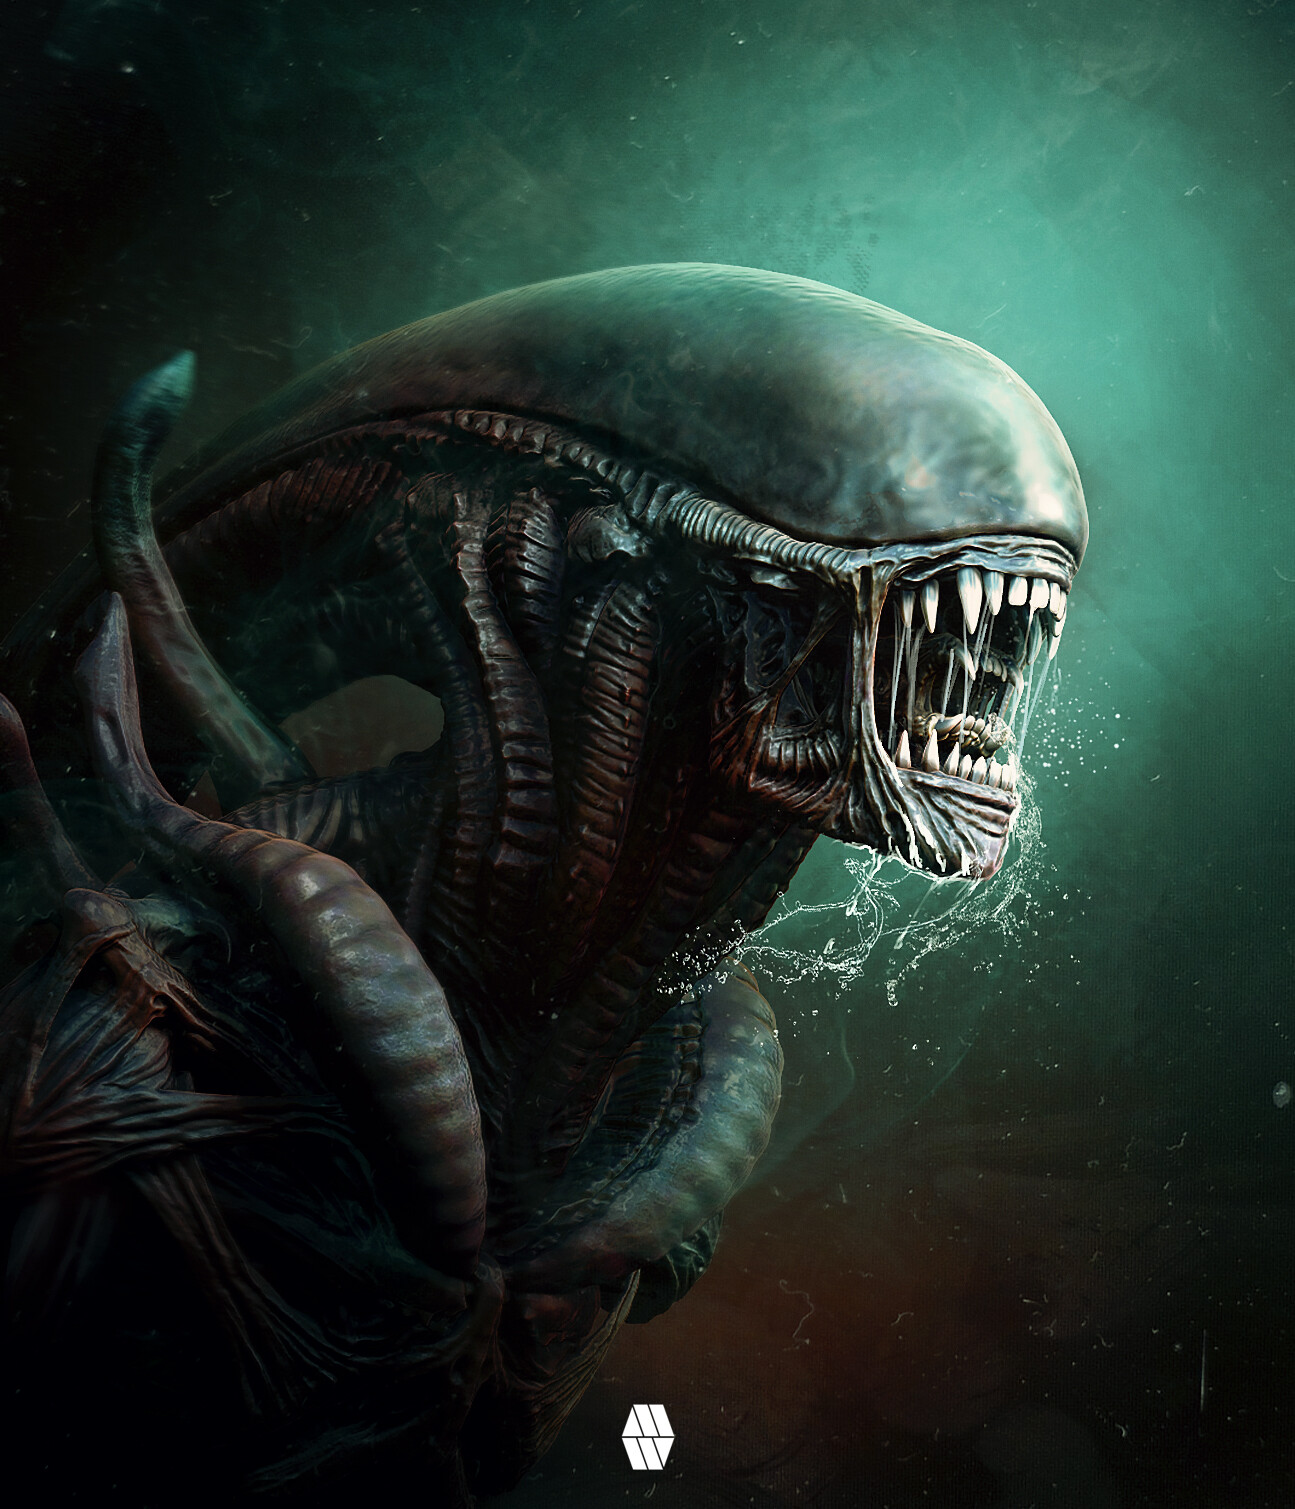 An Alien Emerges - 'Aliens' concept personal project, Marcus Whin...